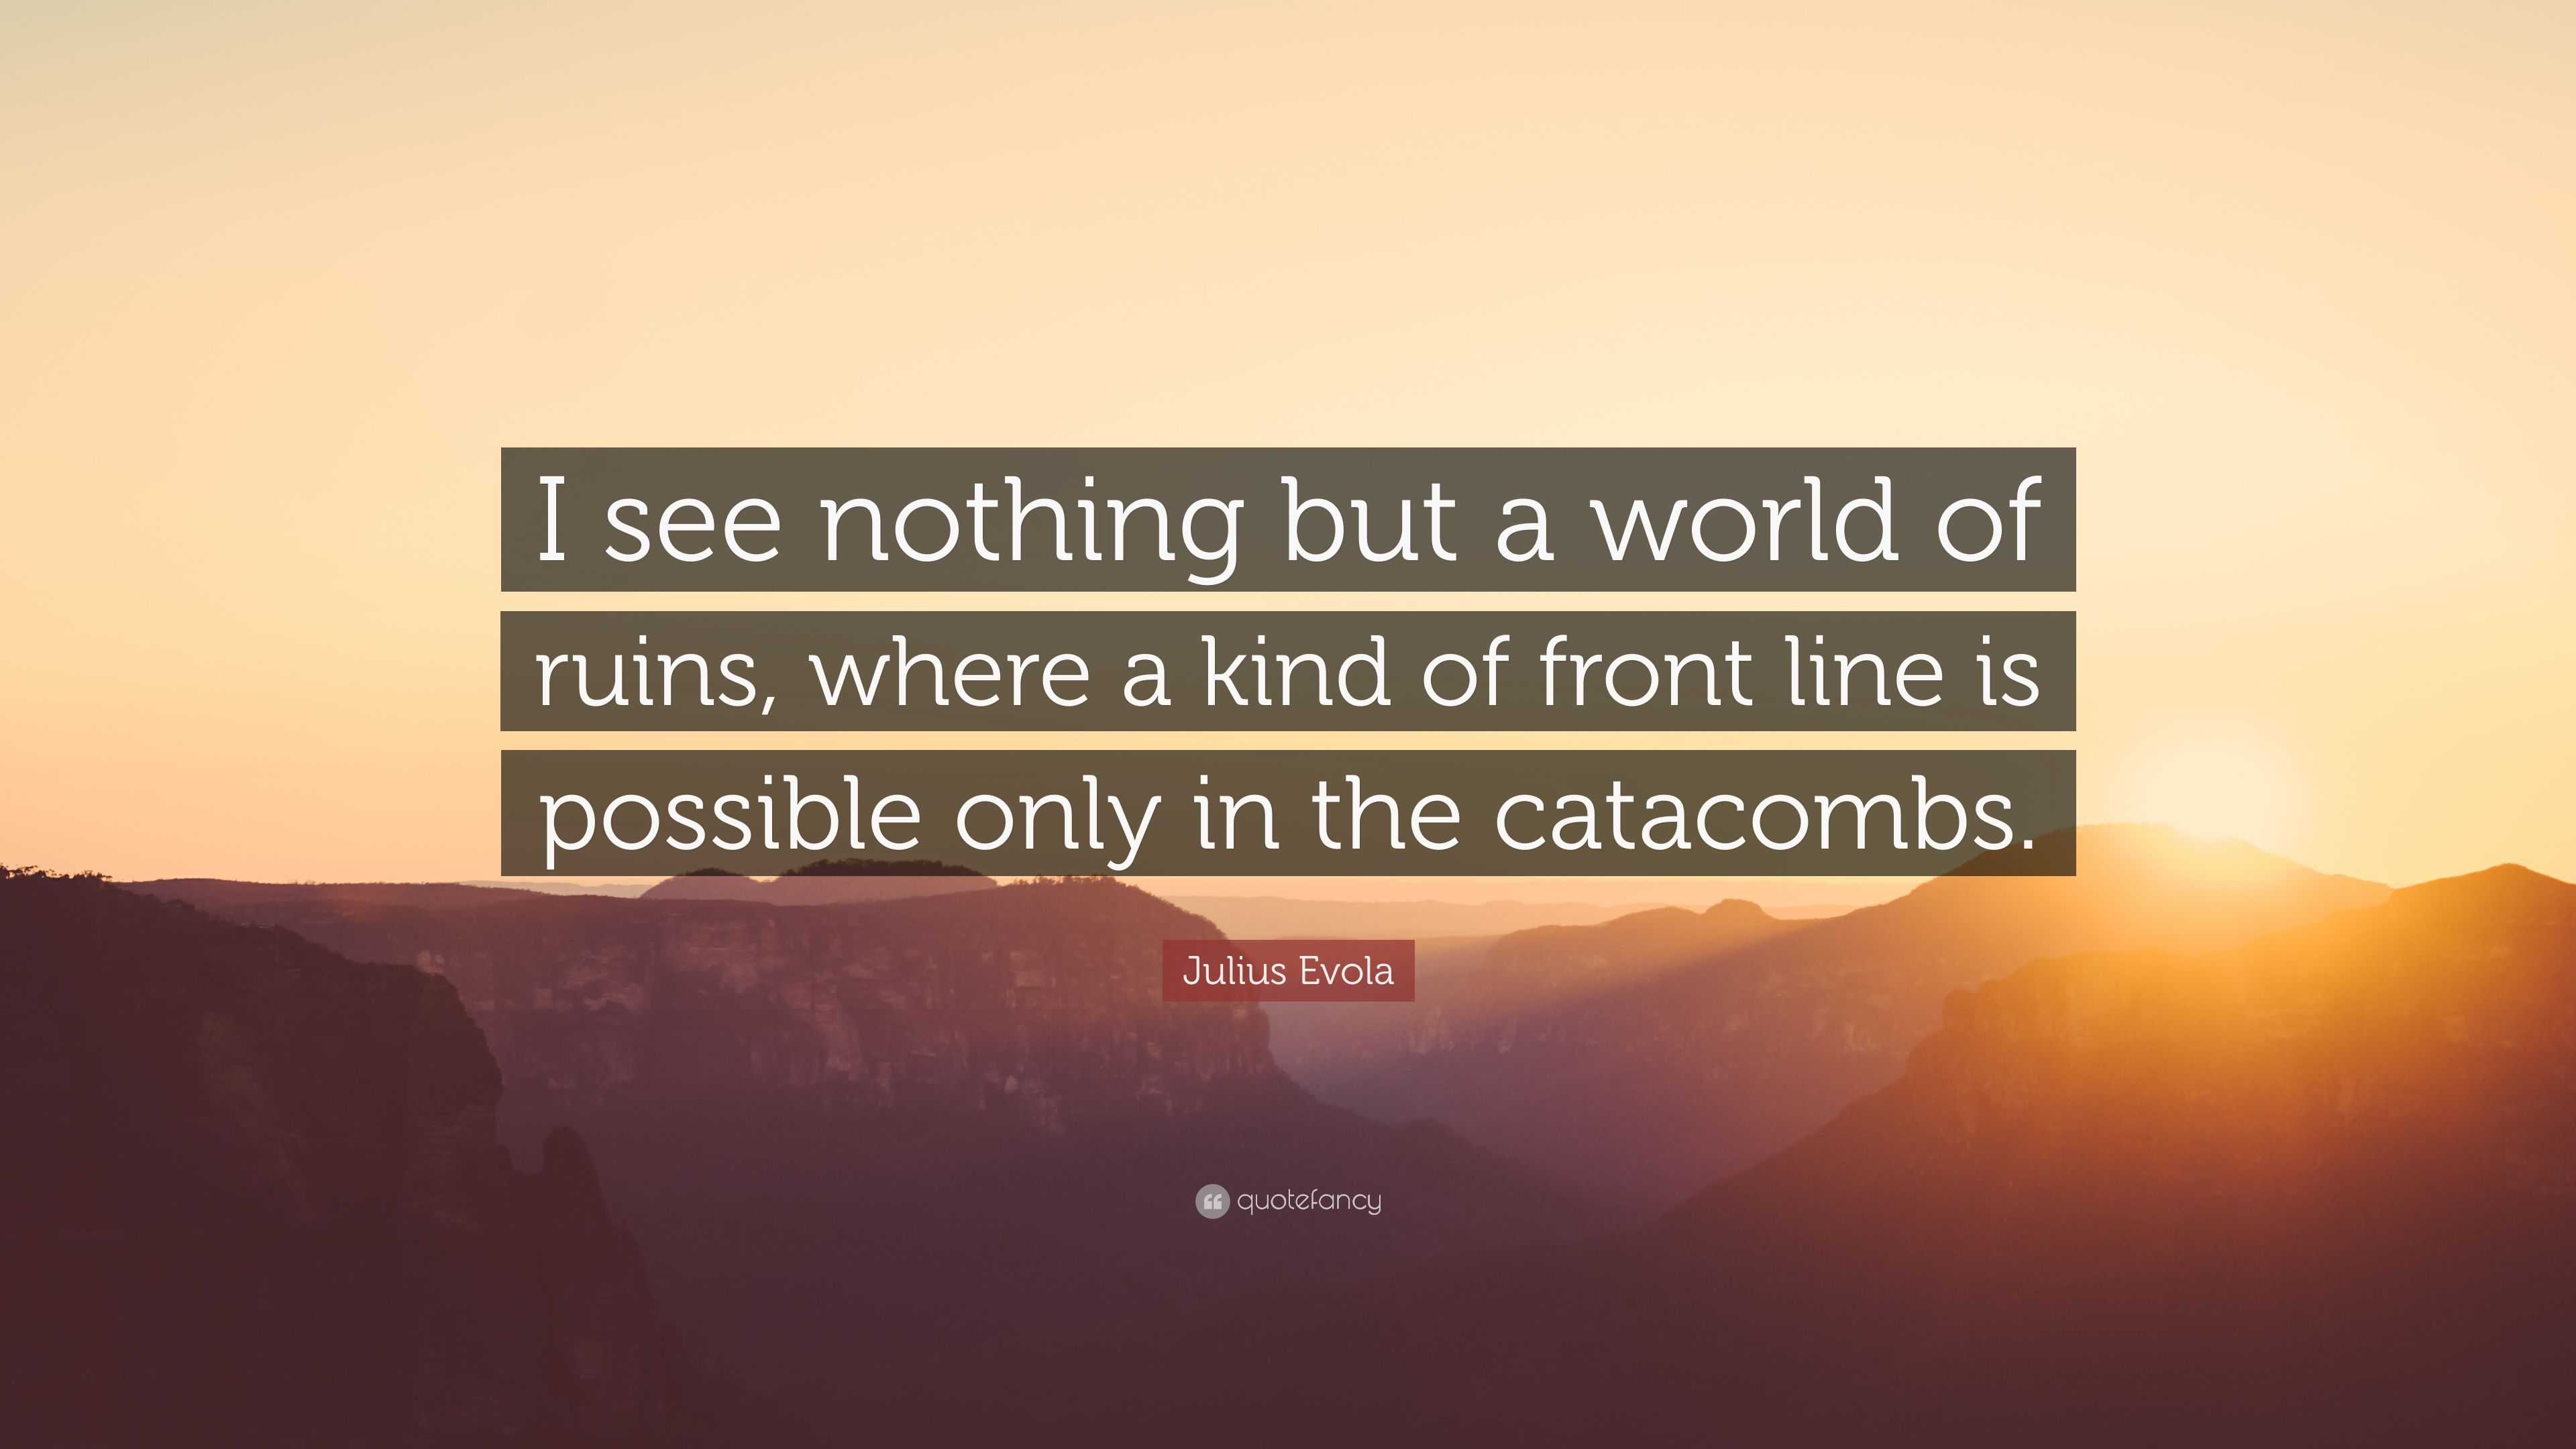 Julius Evola Quote: "I see nothing but a world of ruins, where a kind of front line is possible ...